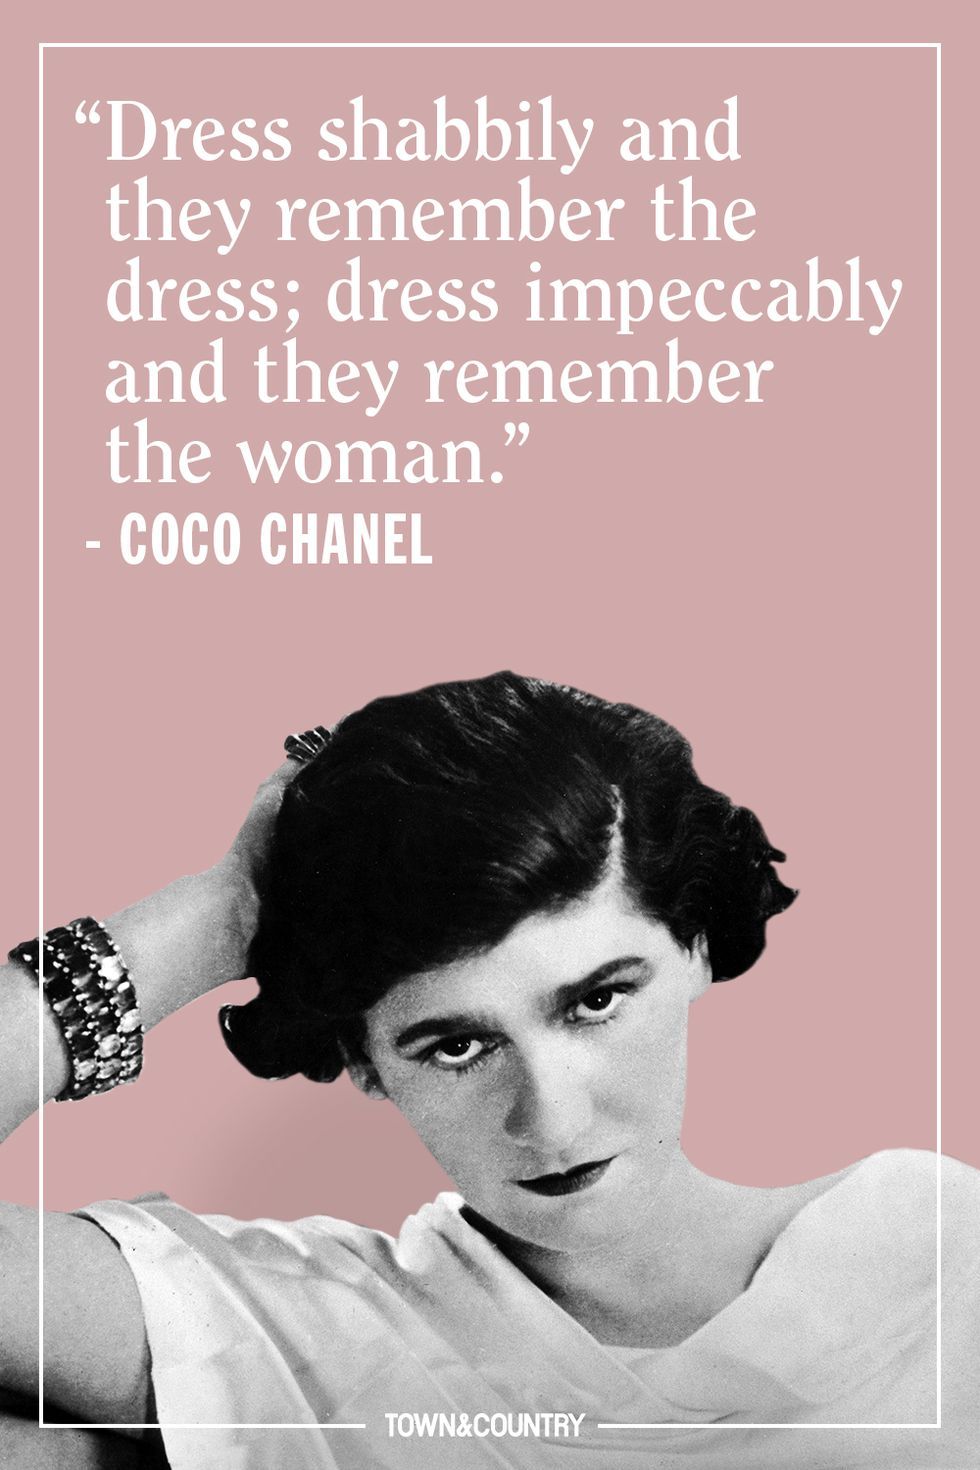 famous dress for success quotes